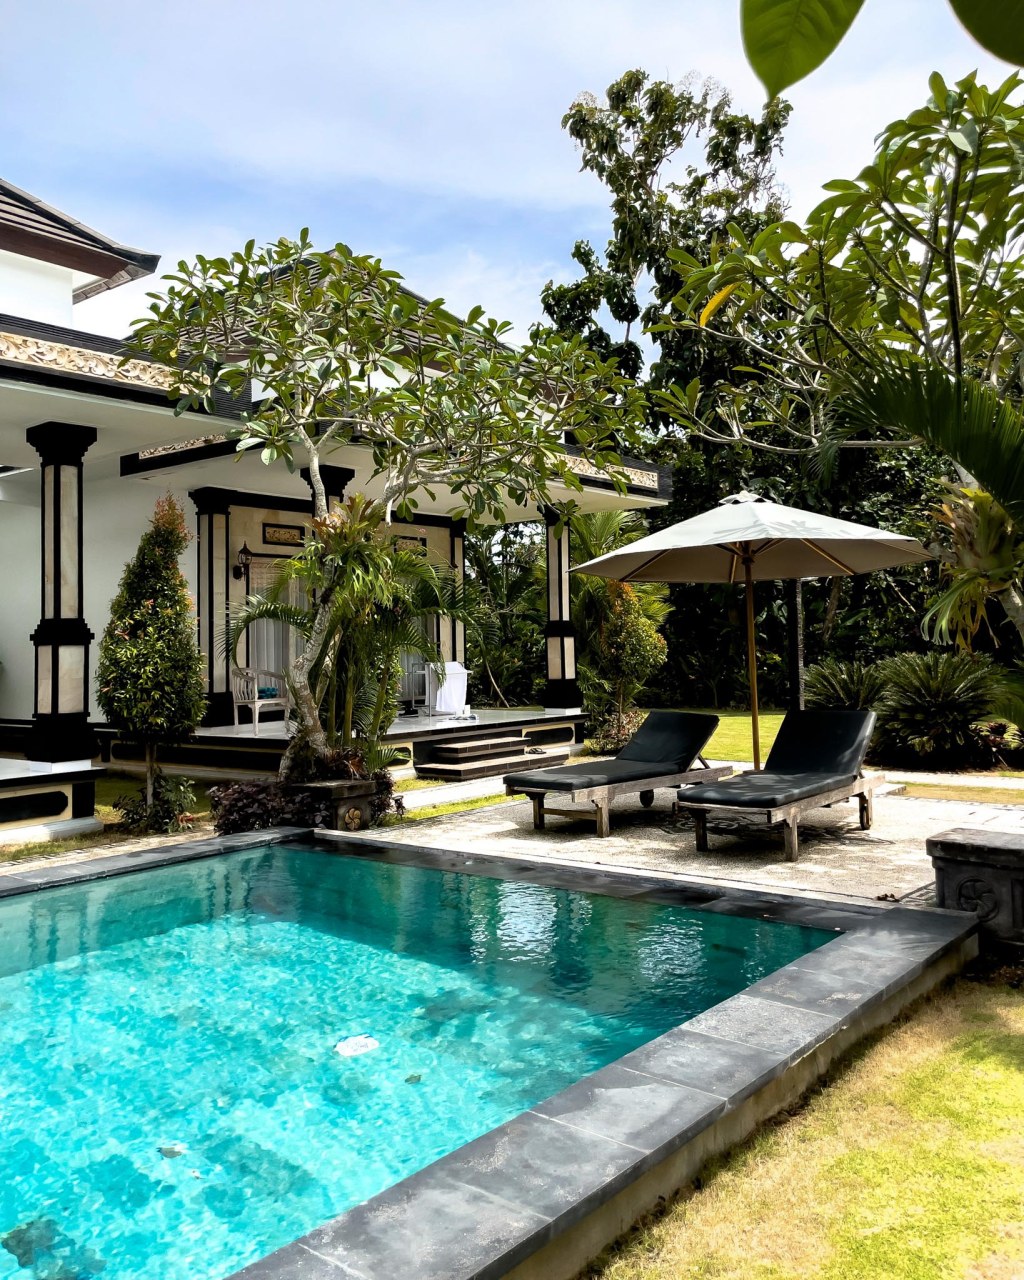 5 Places to Stay in Bali with Very Different Prices